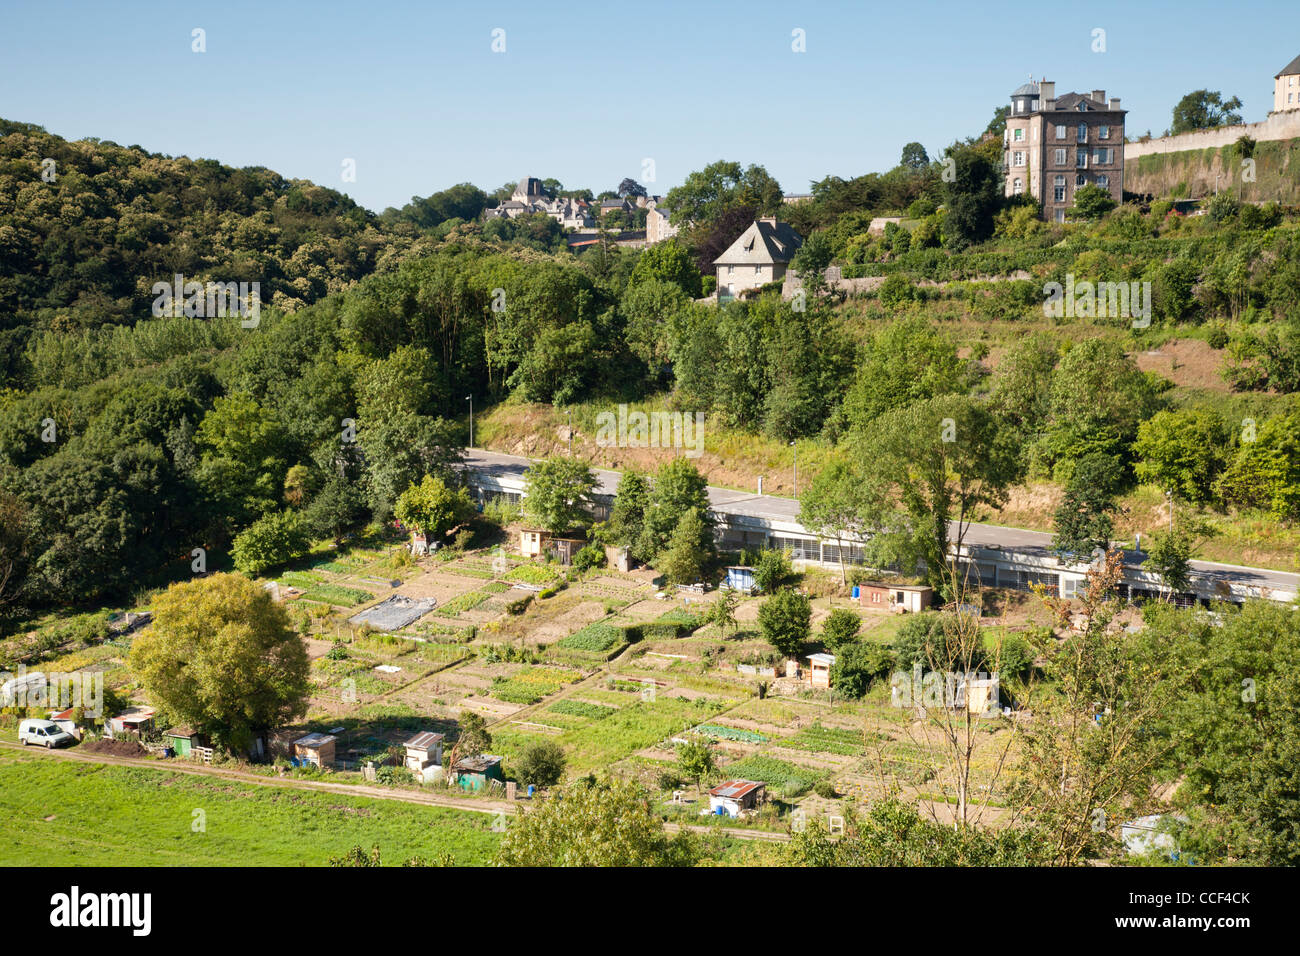 Allotments near the medieval town of Dinan, Brittany, France. Stock Photo